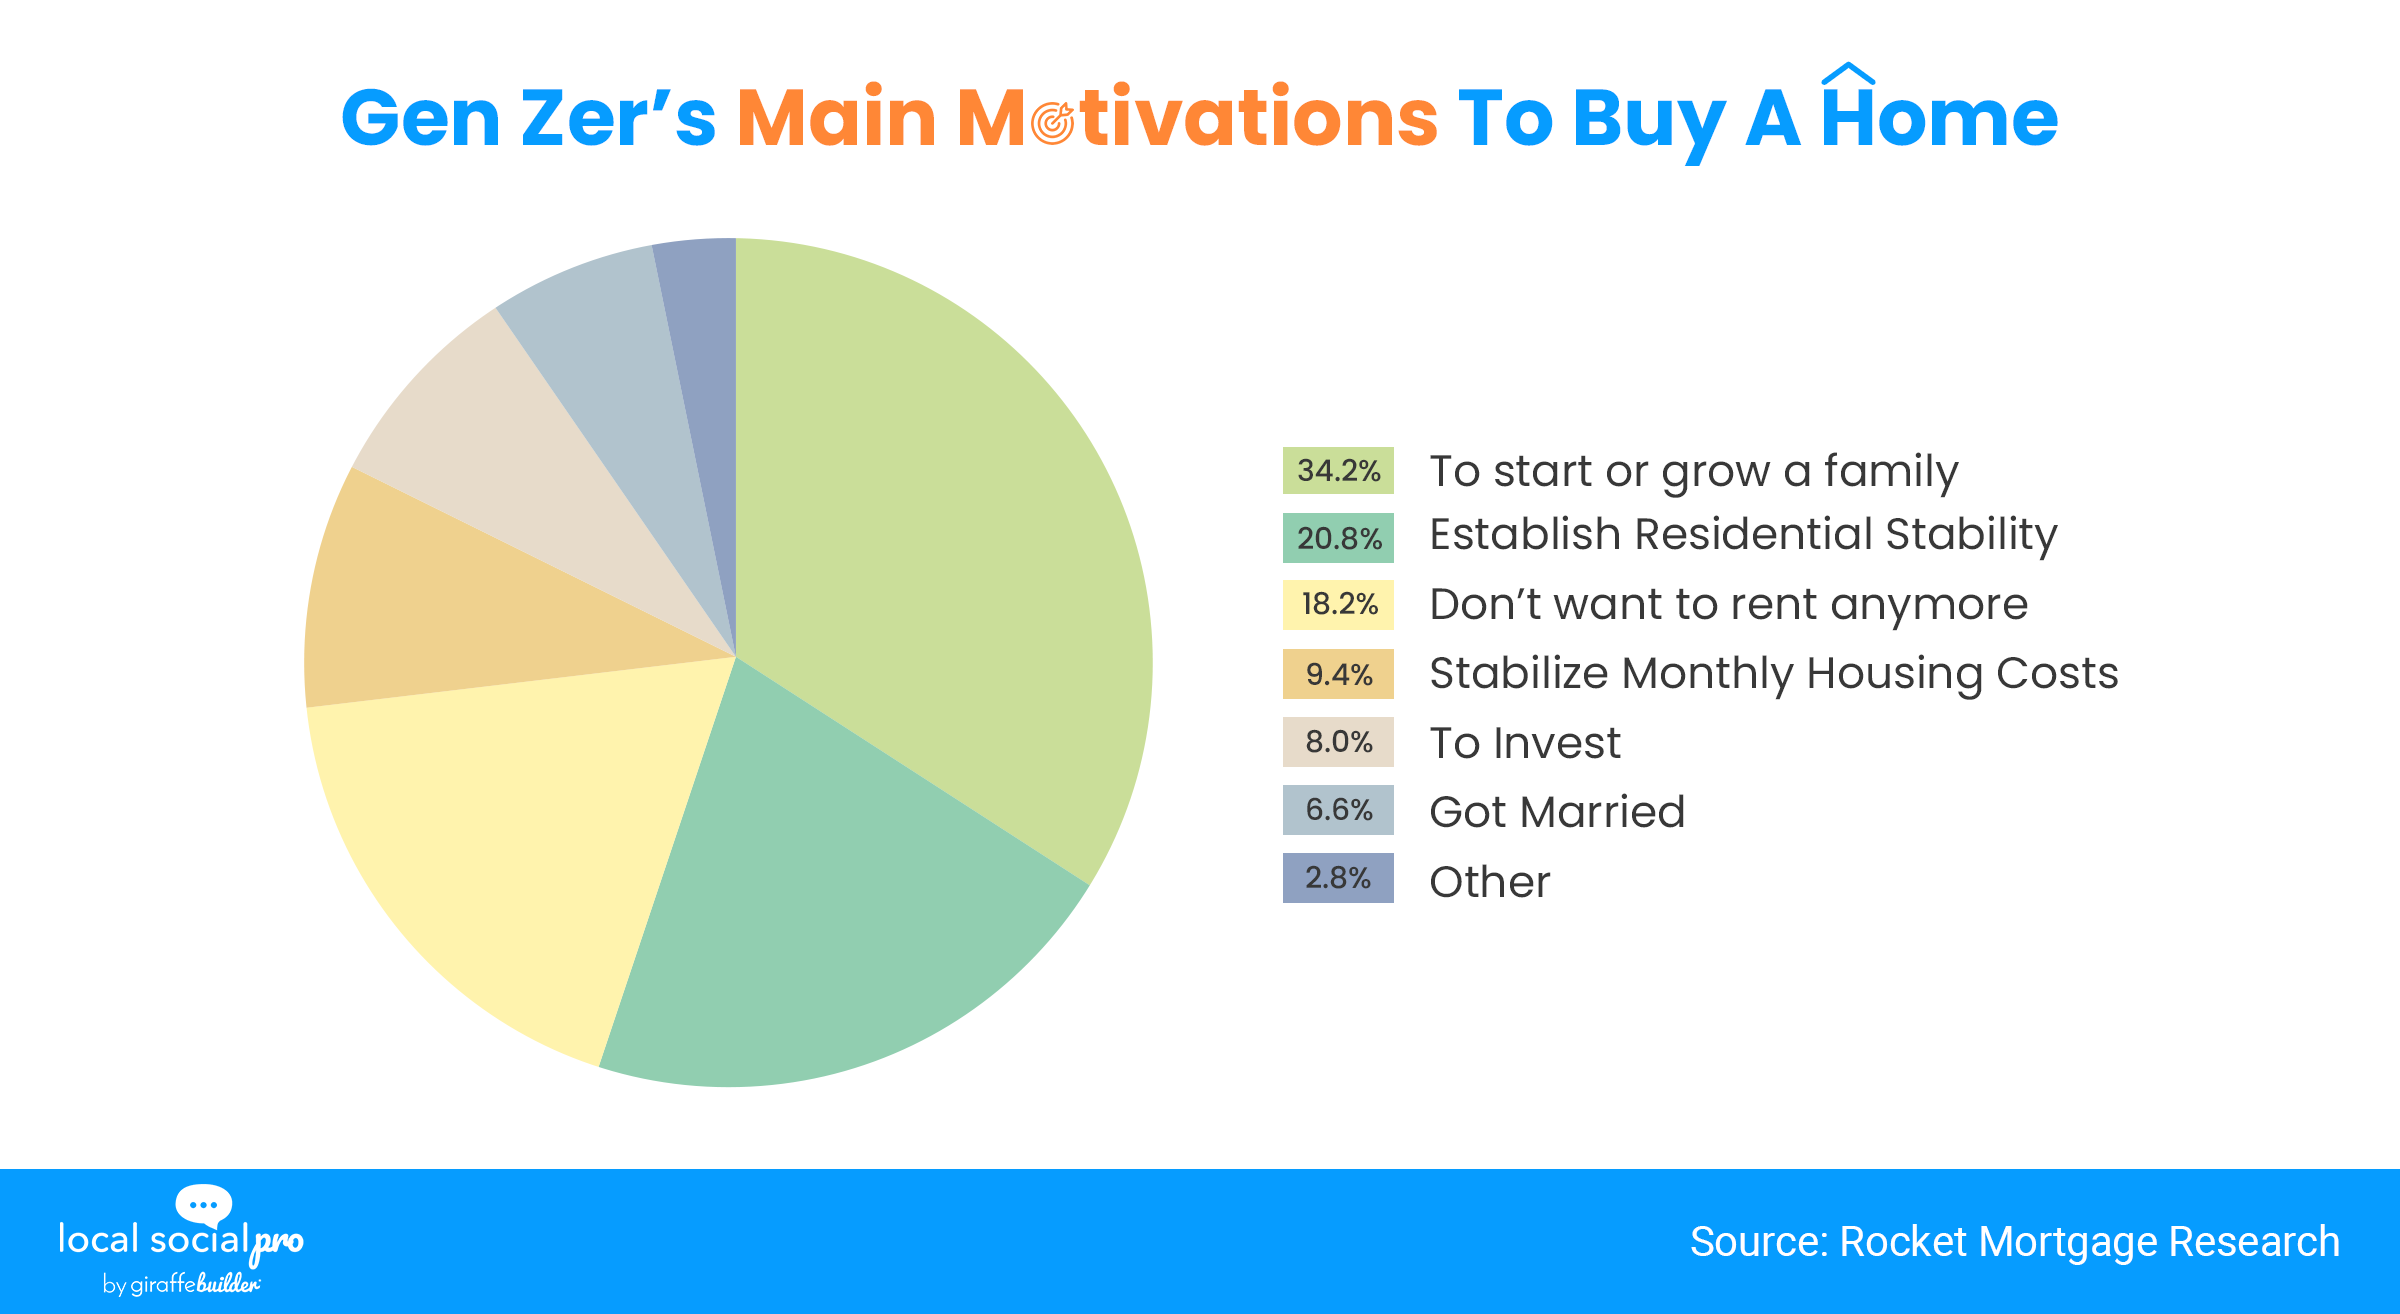 Gen Zer's Main Motivations To Buy A Home